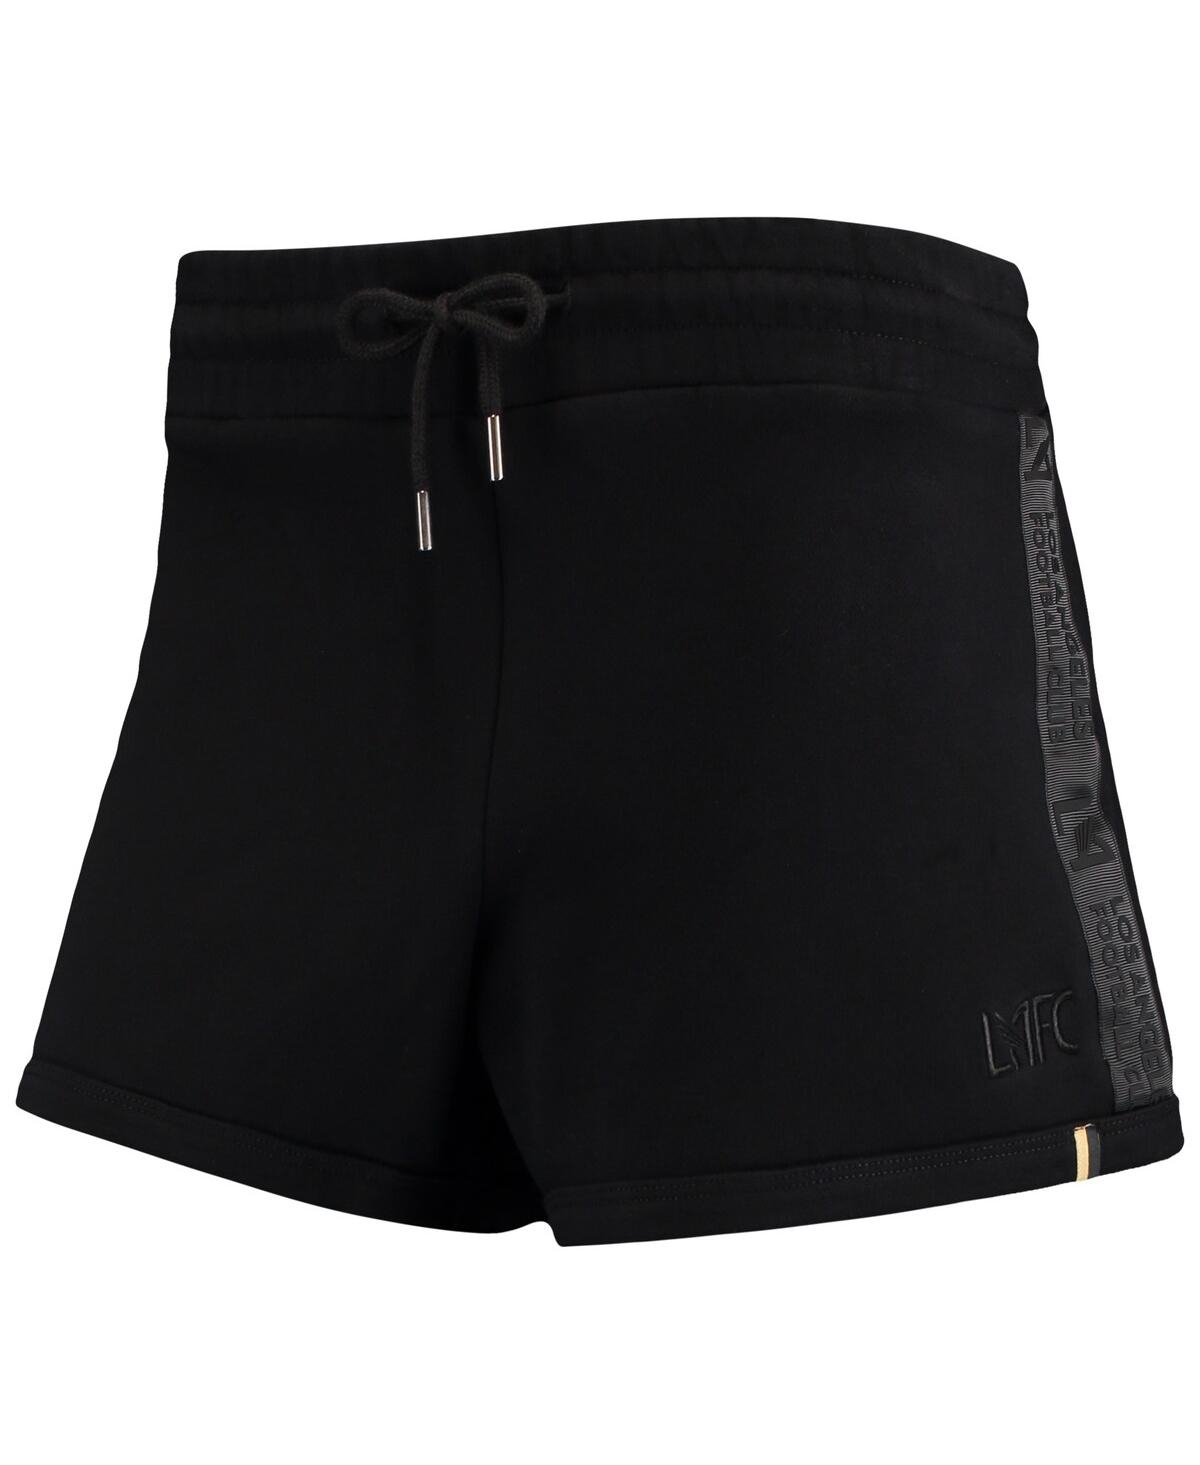 Shop The Wild Collective Women's  Black Lafc Chill Shorts